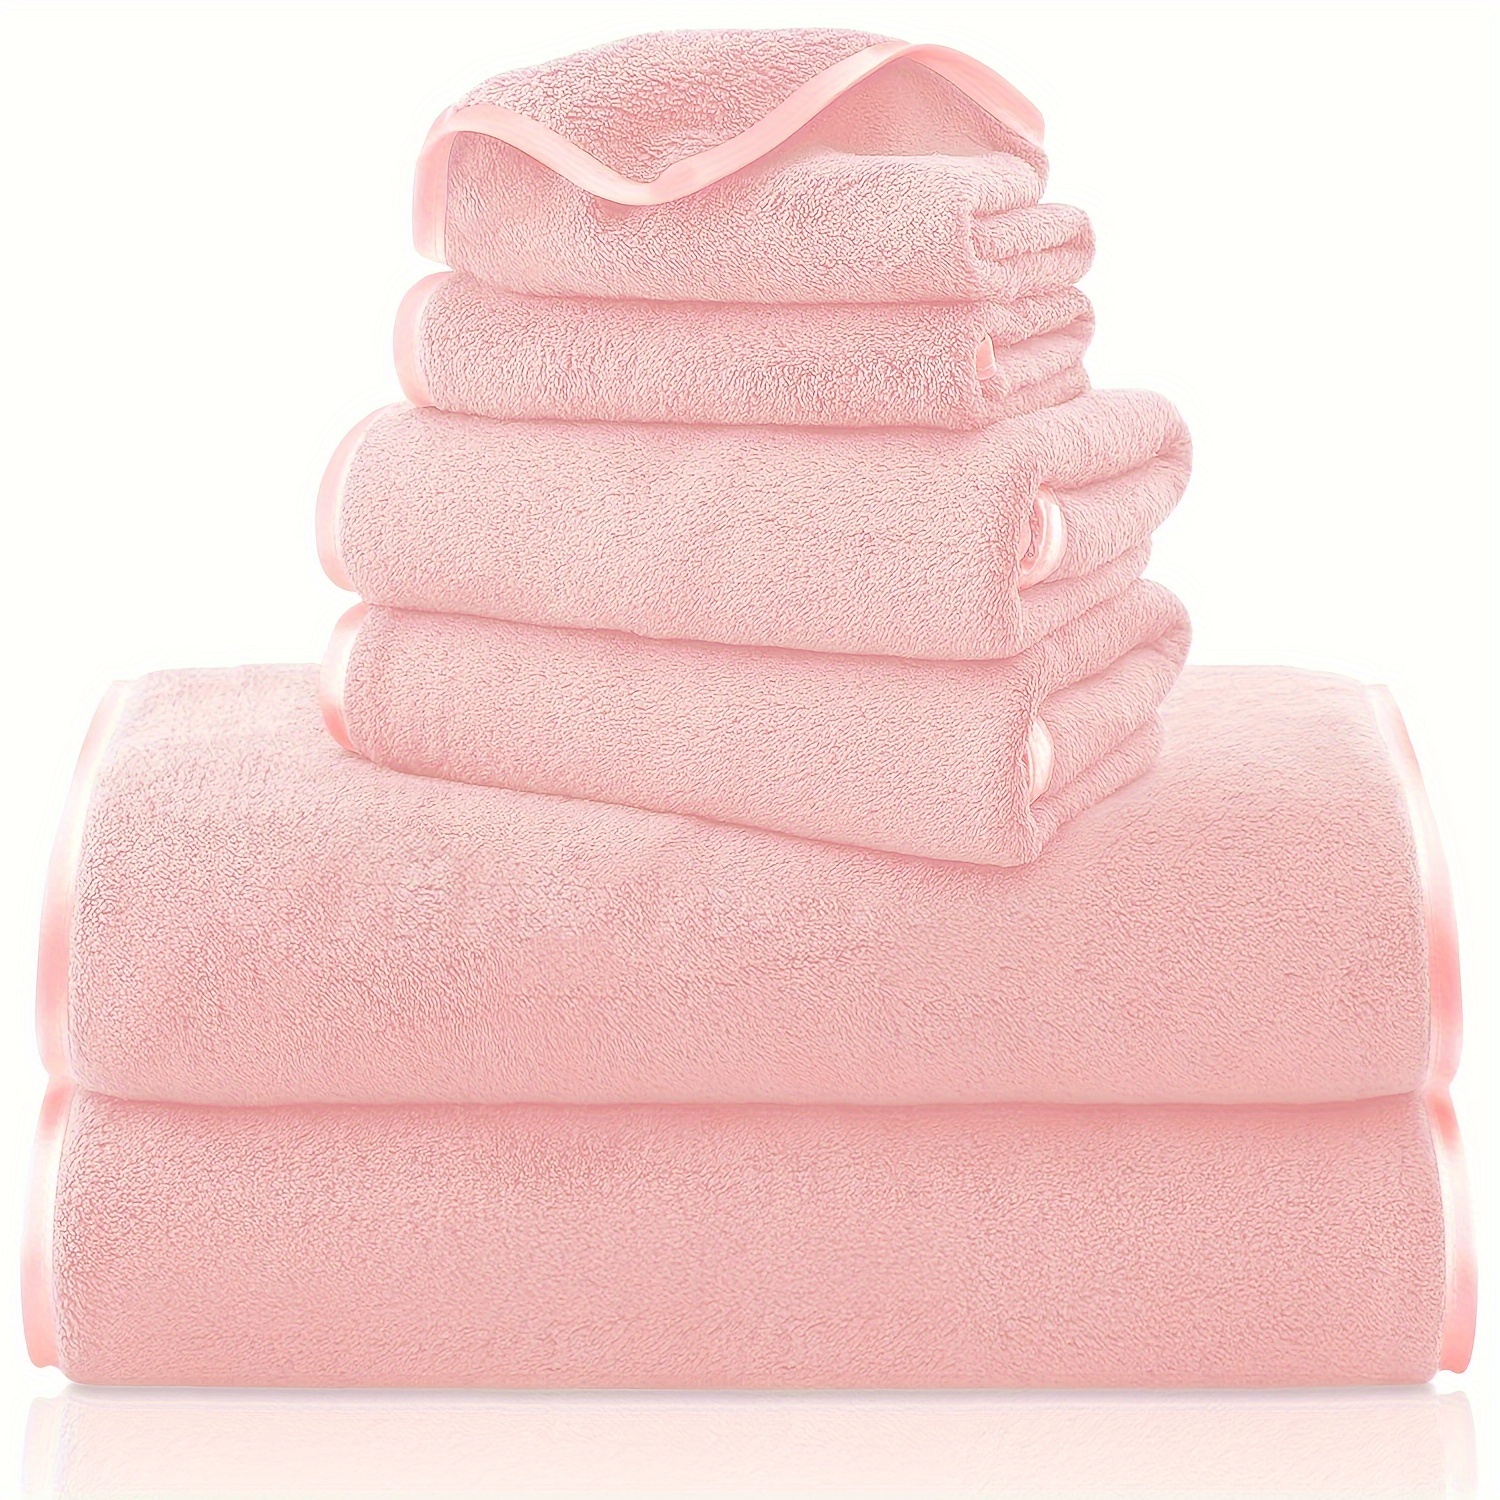 8pcs Microfiber Towel Set Super Absorbent And Soft Quick Dry Lightweight 4 Bath  Towels 28in*55in & 4 Hand Towels 14in*30in For pools Beach Bathroom hotels  showers beaches gyms and more